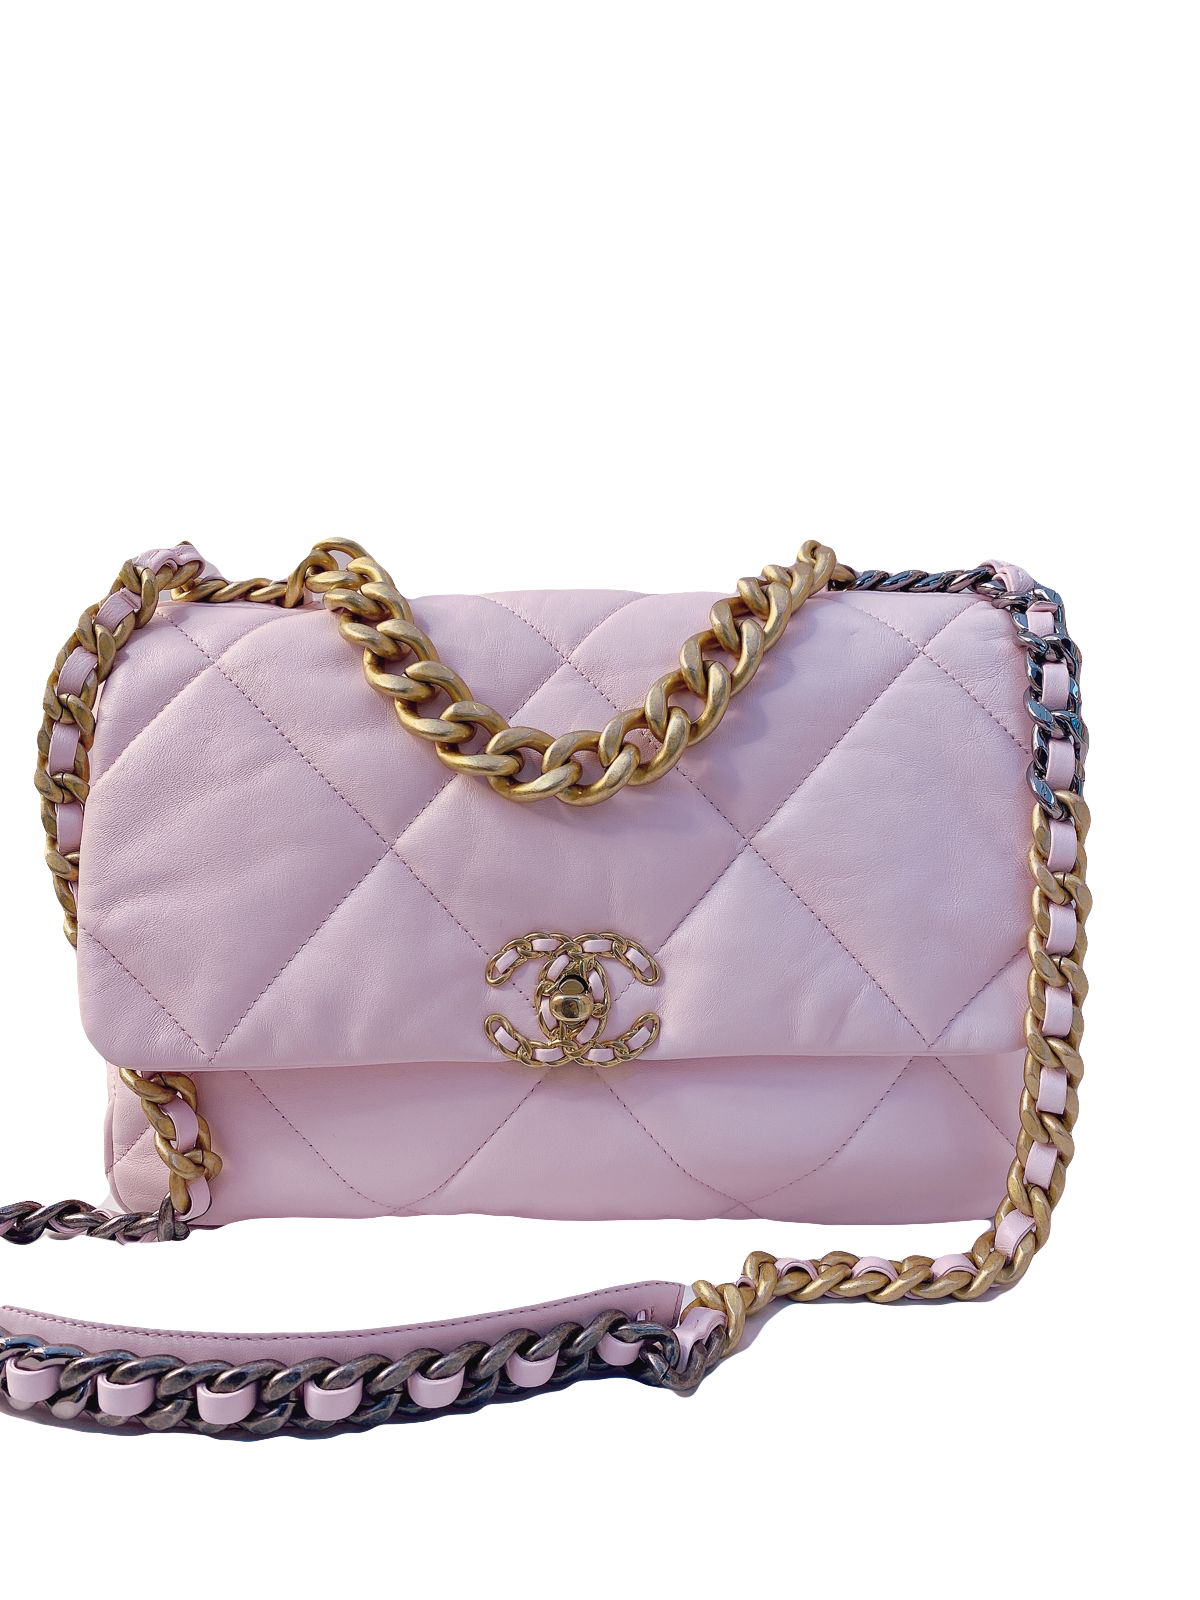 CHANEL Lambskin Quilted Large Chanel 19 Flap Light Pink | FASHIONPHILE